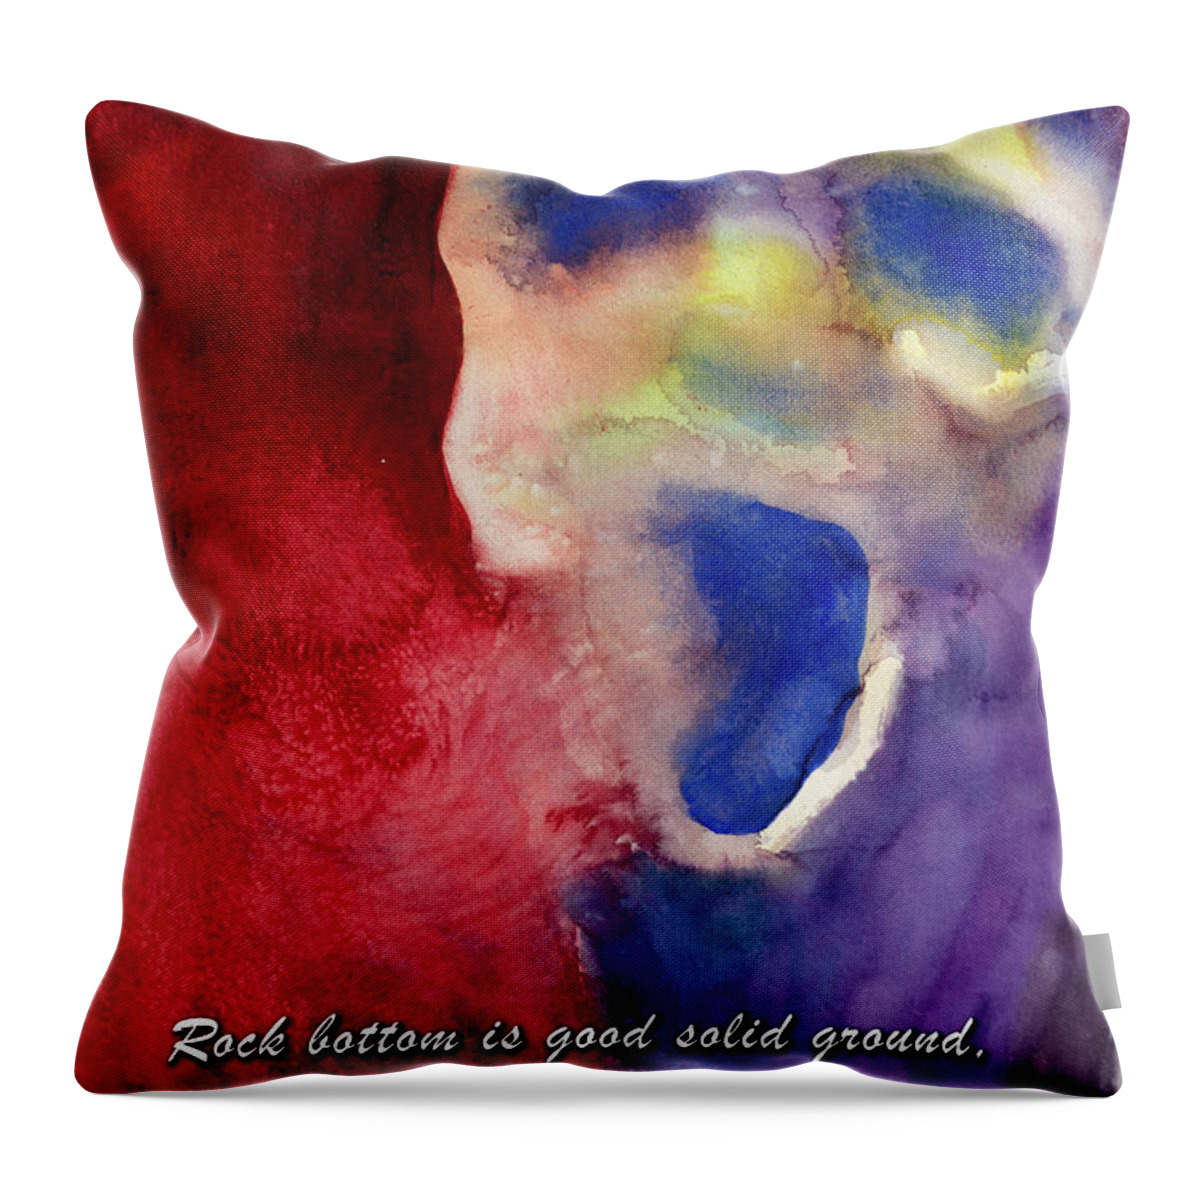 Rock Bottom Throw Pillow featuring the photograph Rock Bottom by Rick Mosher